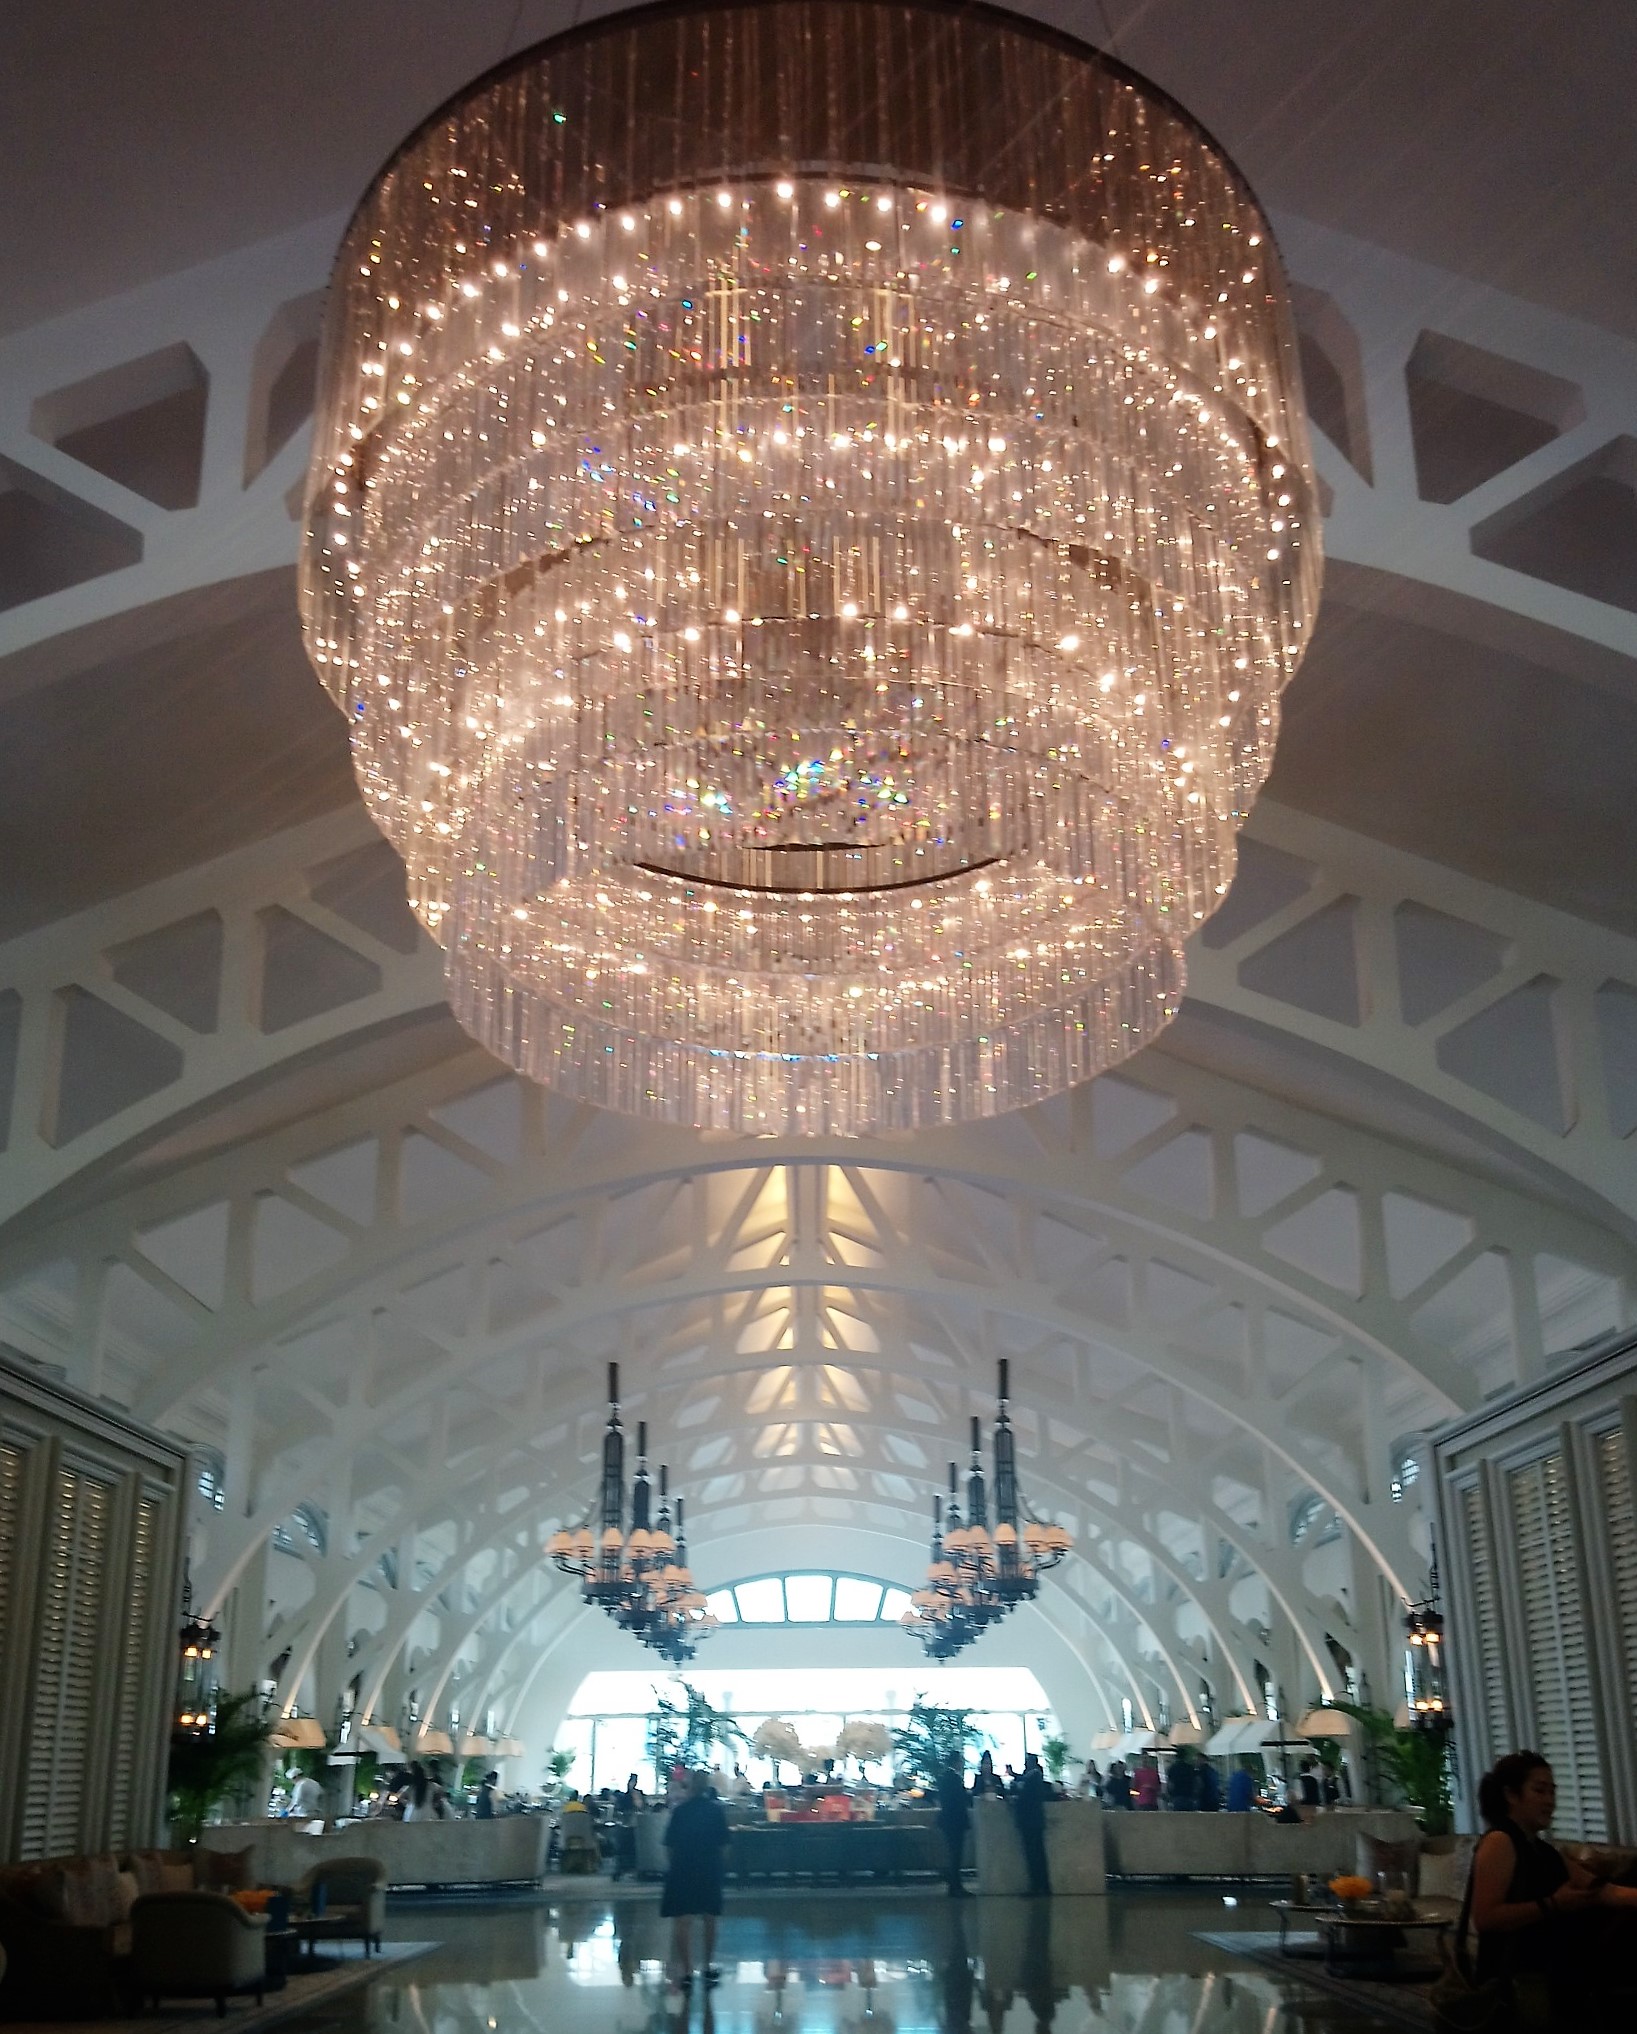 The entrance to The Clifford Pier Restaurant in The Fullerton Bay Hotel Singapore